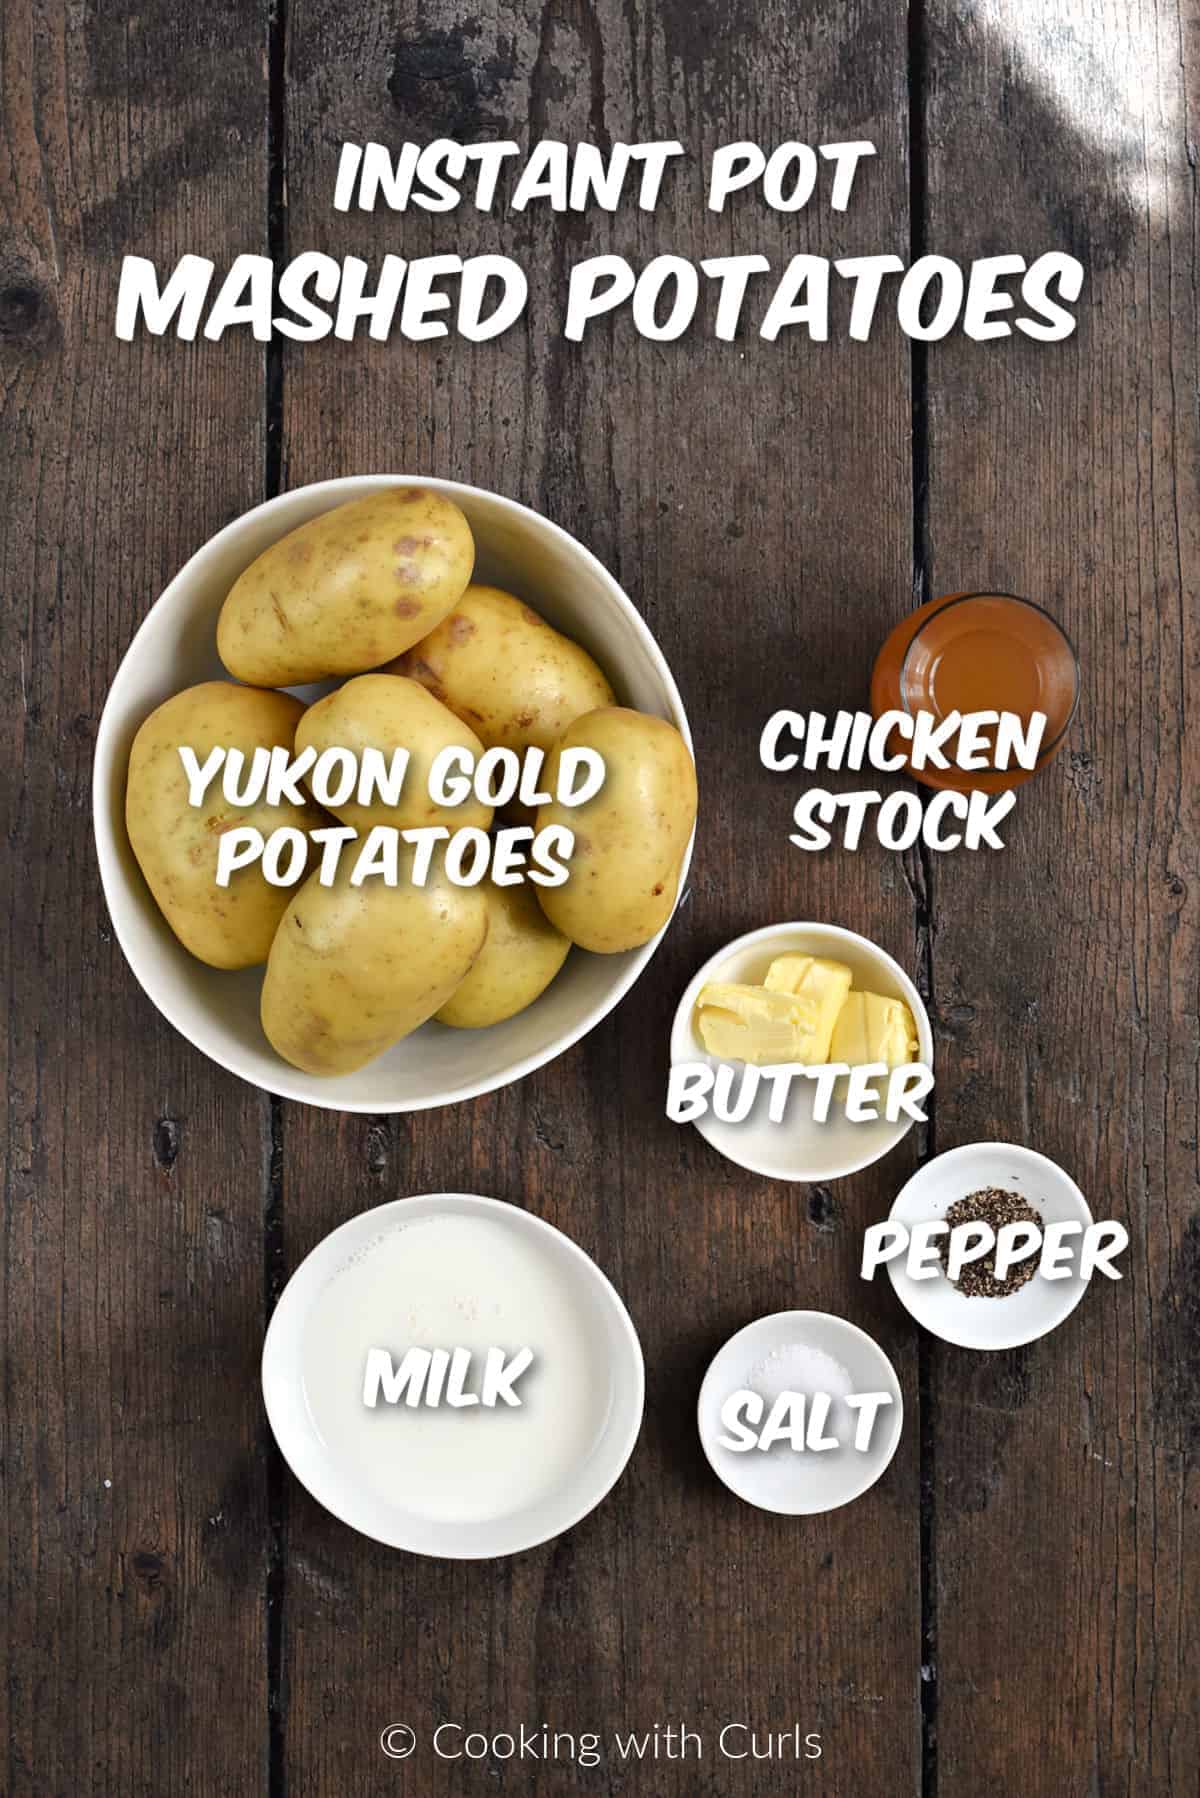 Instant Pot Mashed Potatoes ingredients.